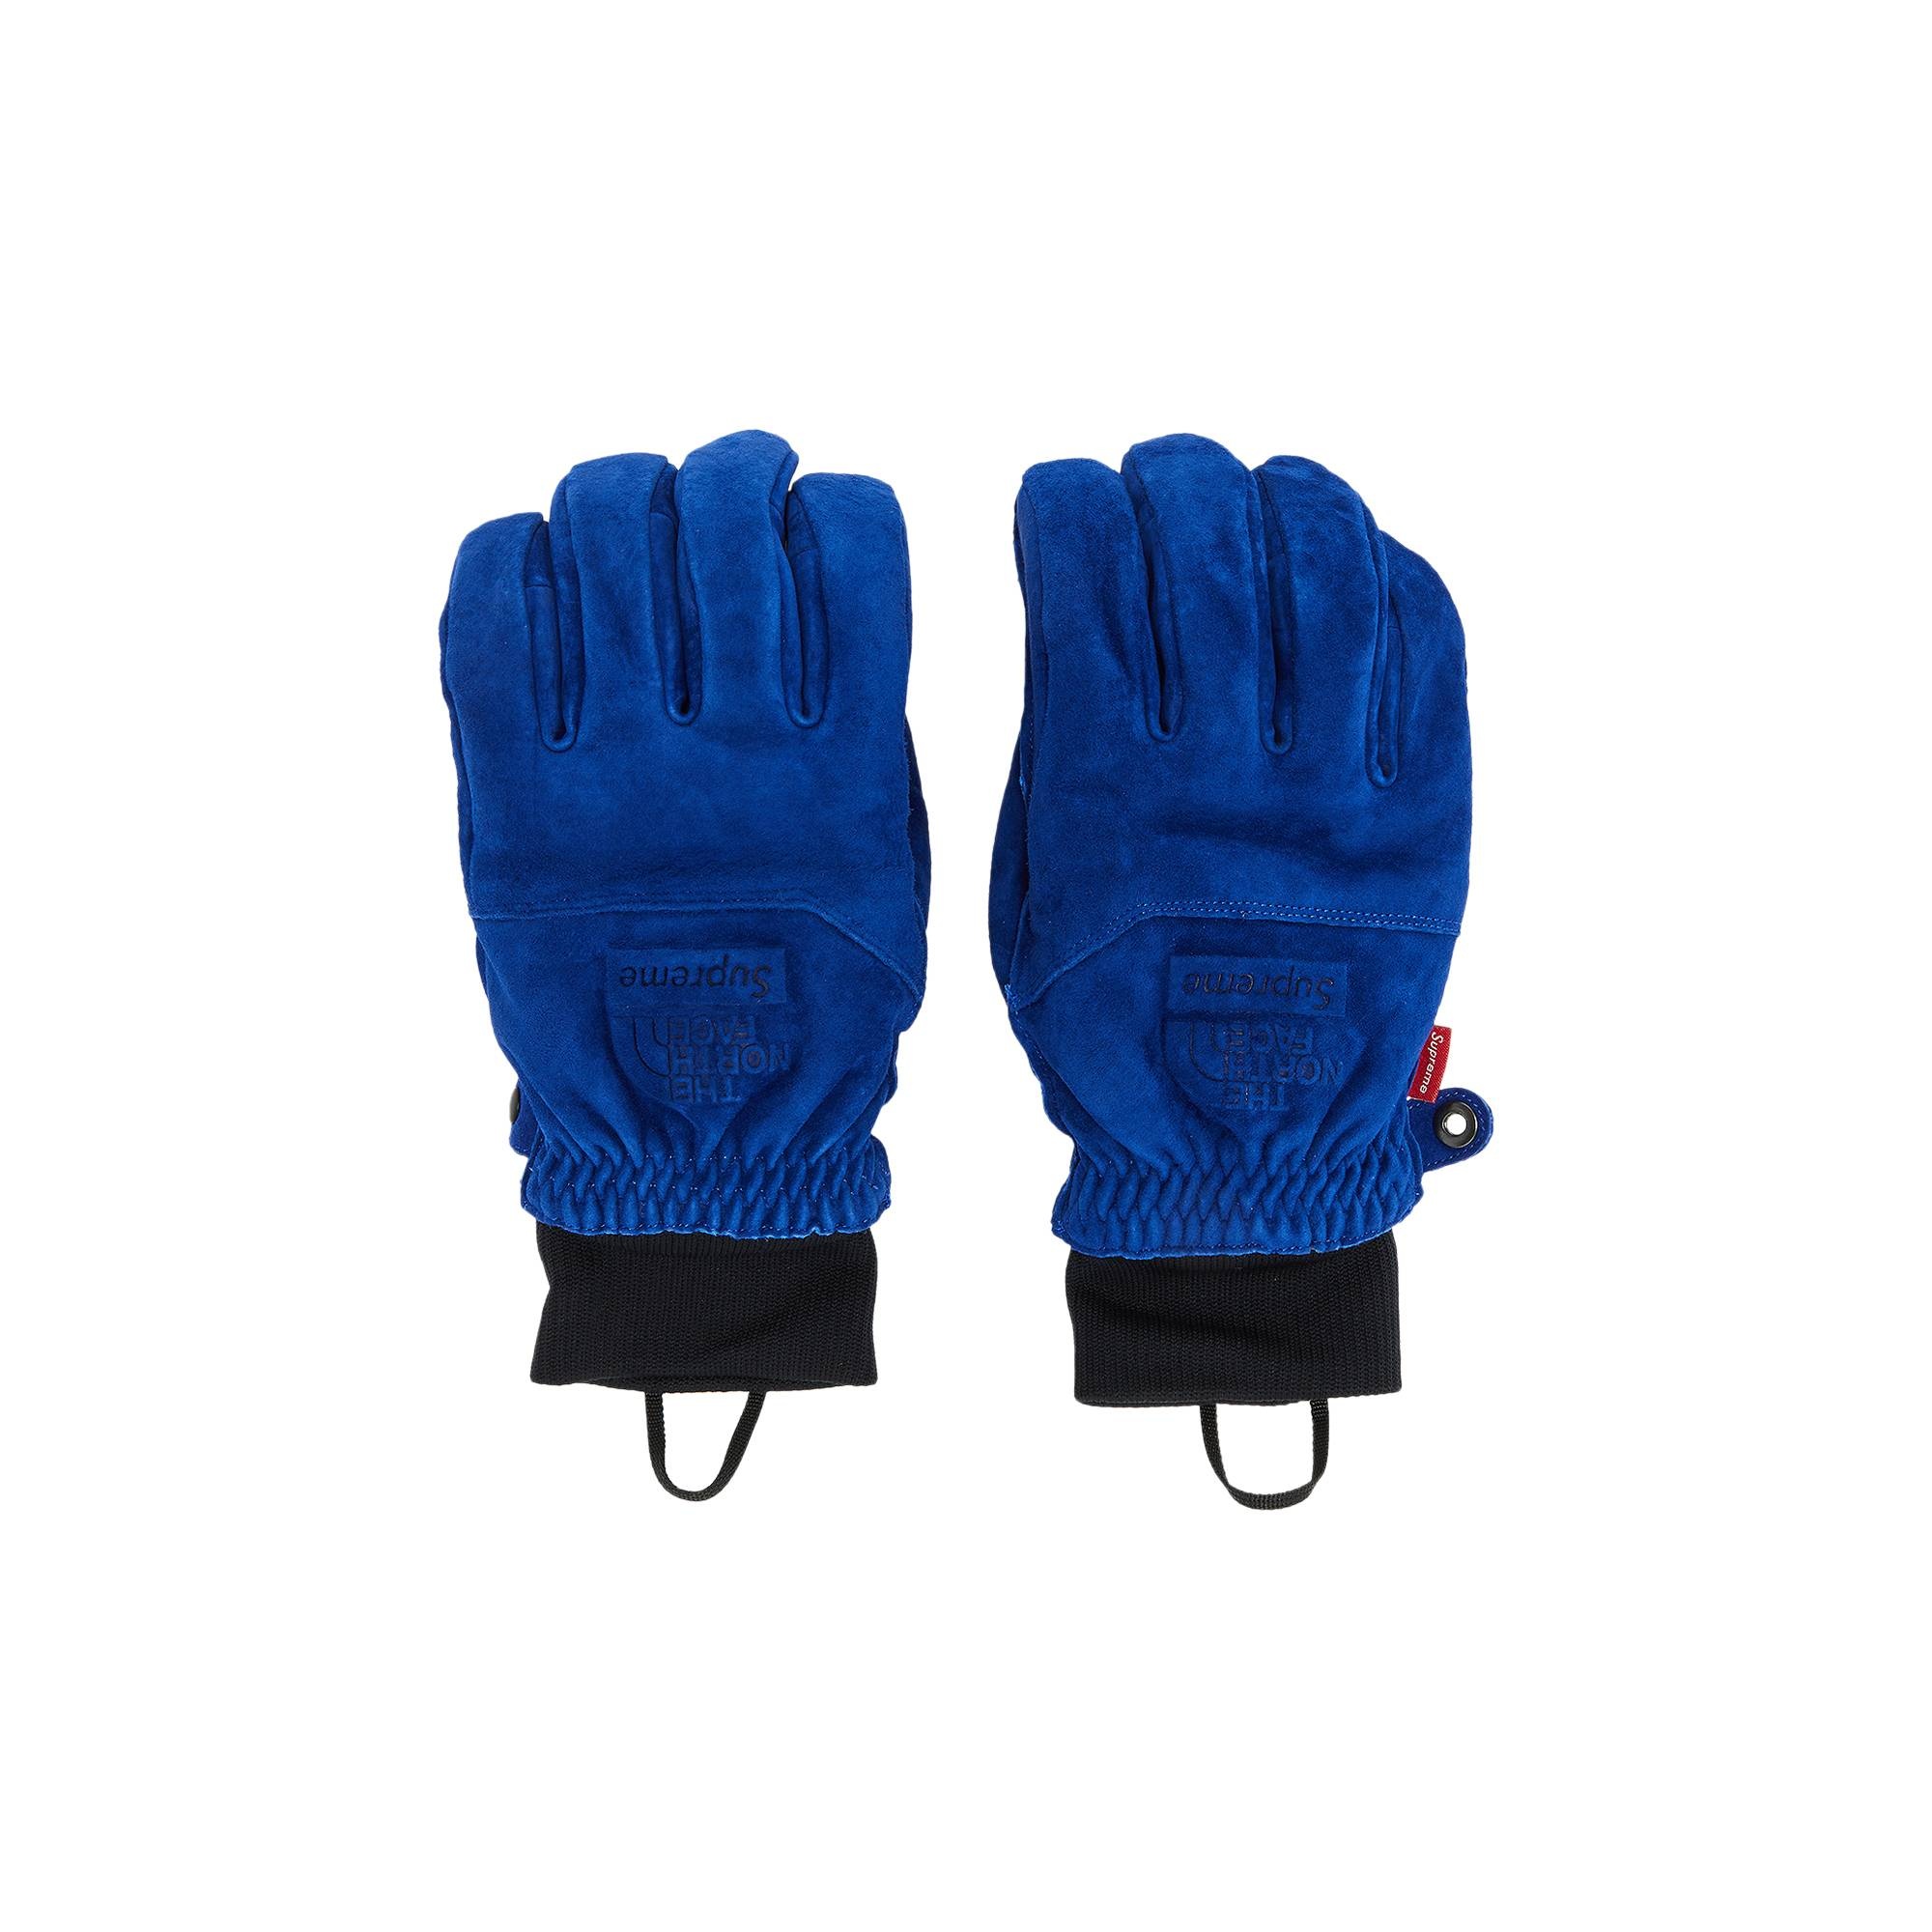 Supreme x The North Face Suede Glove 'Blue' - 1